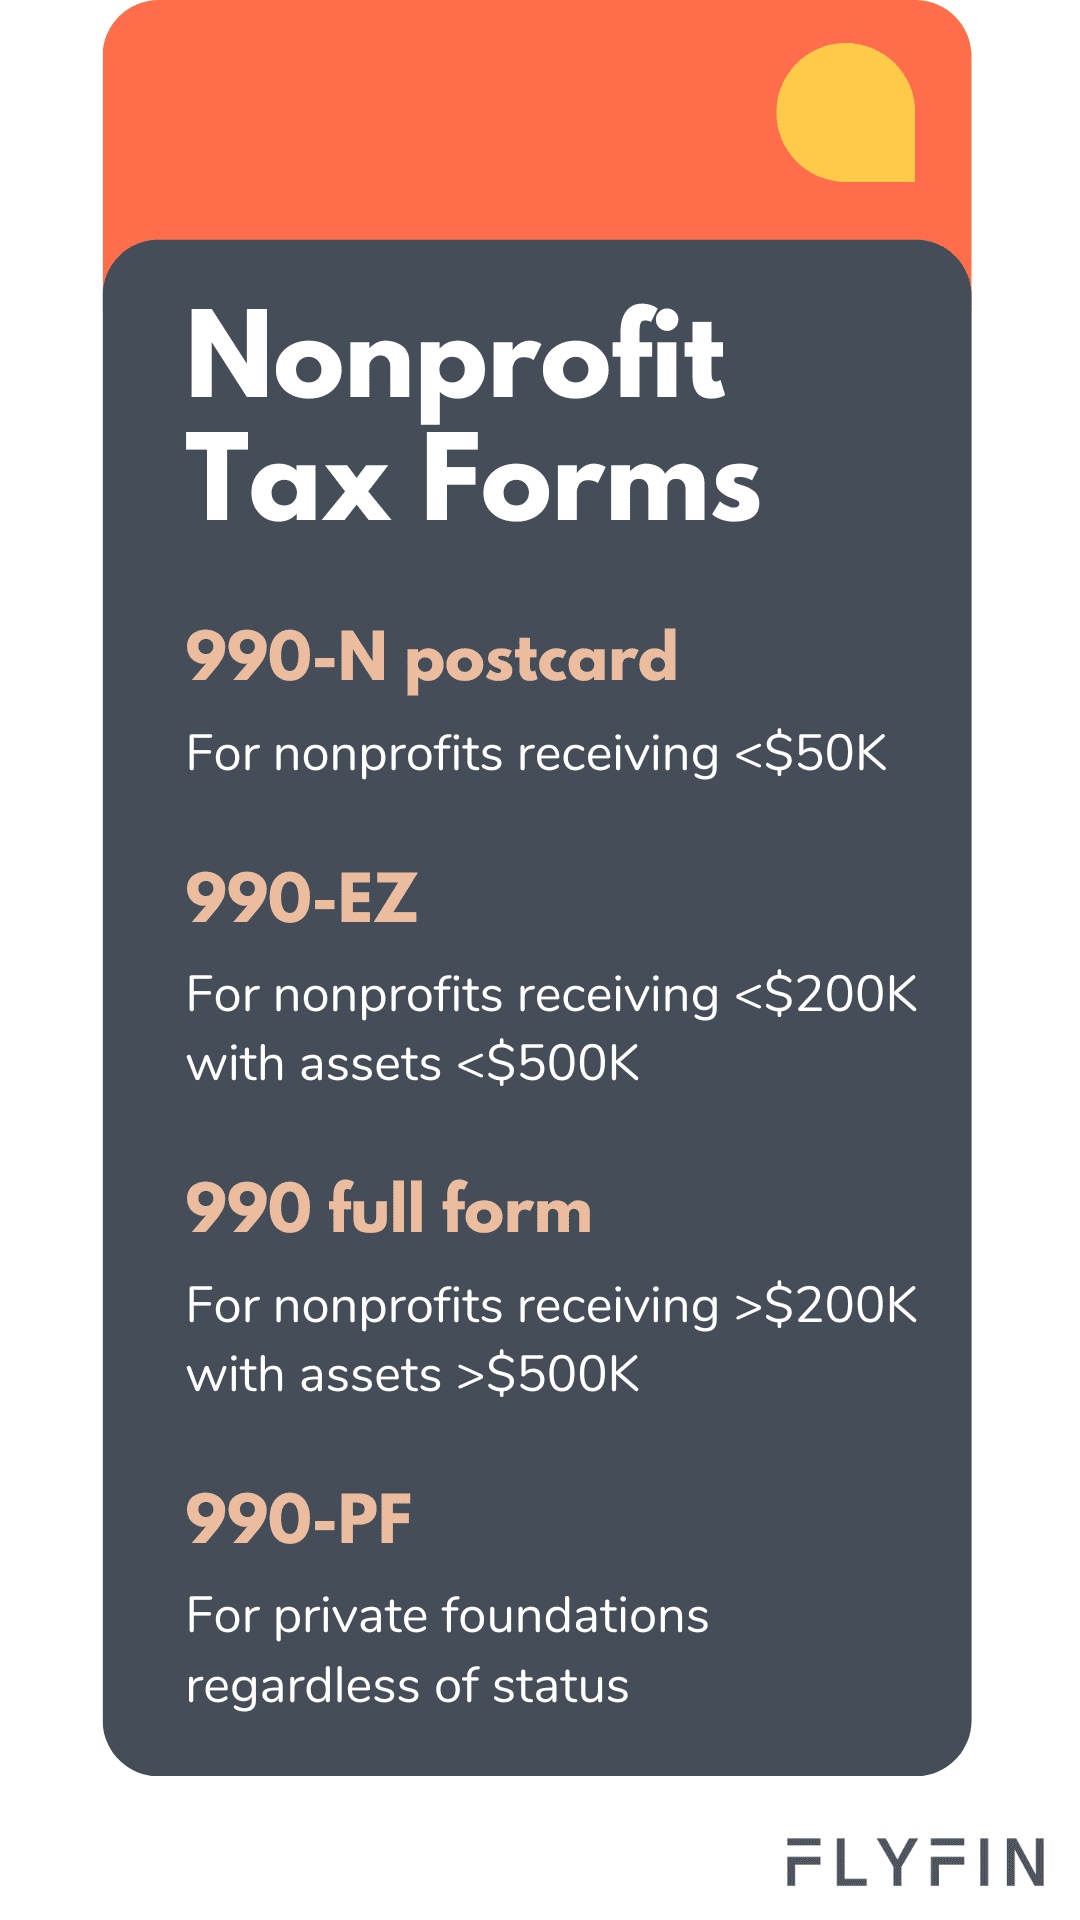 Which 990 form does my 501c3 nonprofit need to file?